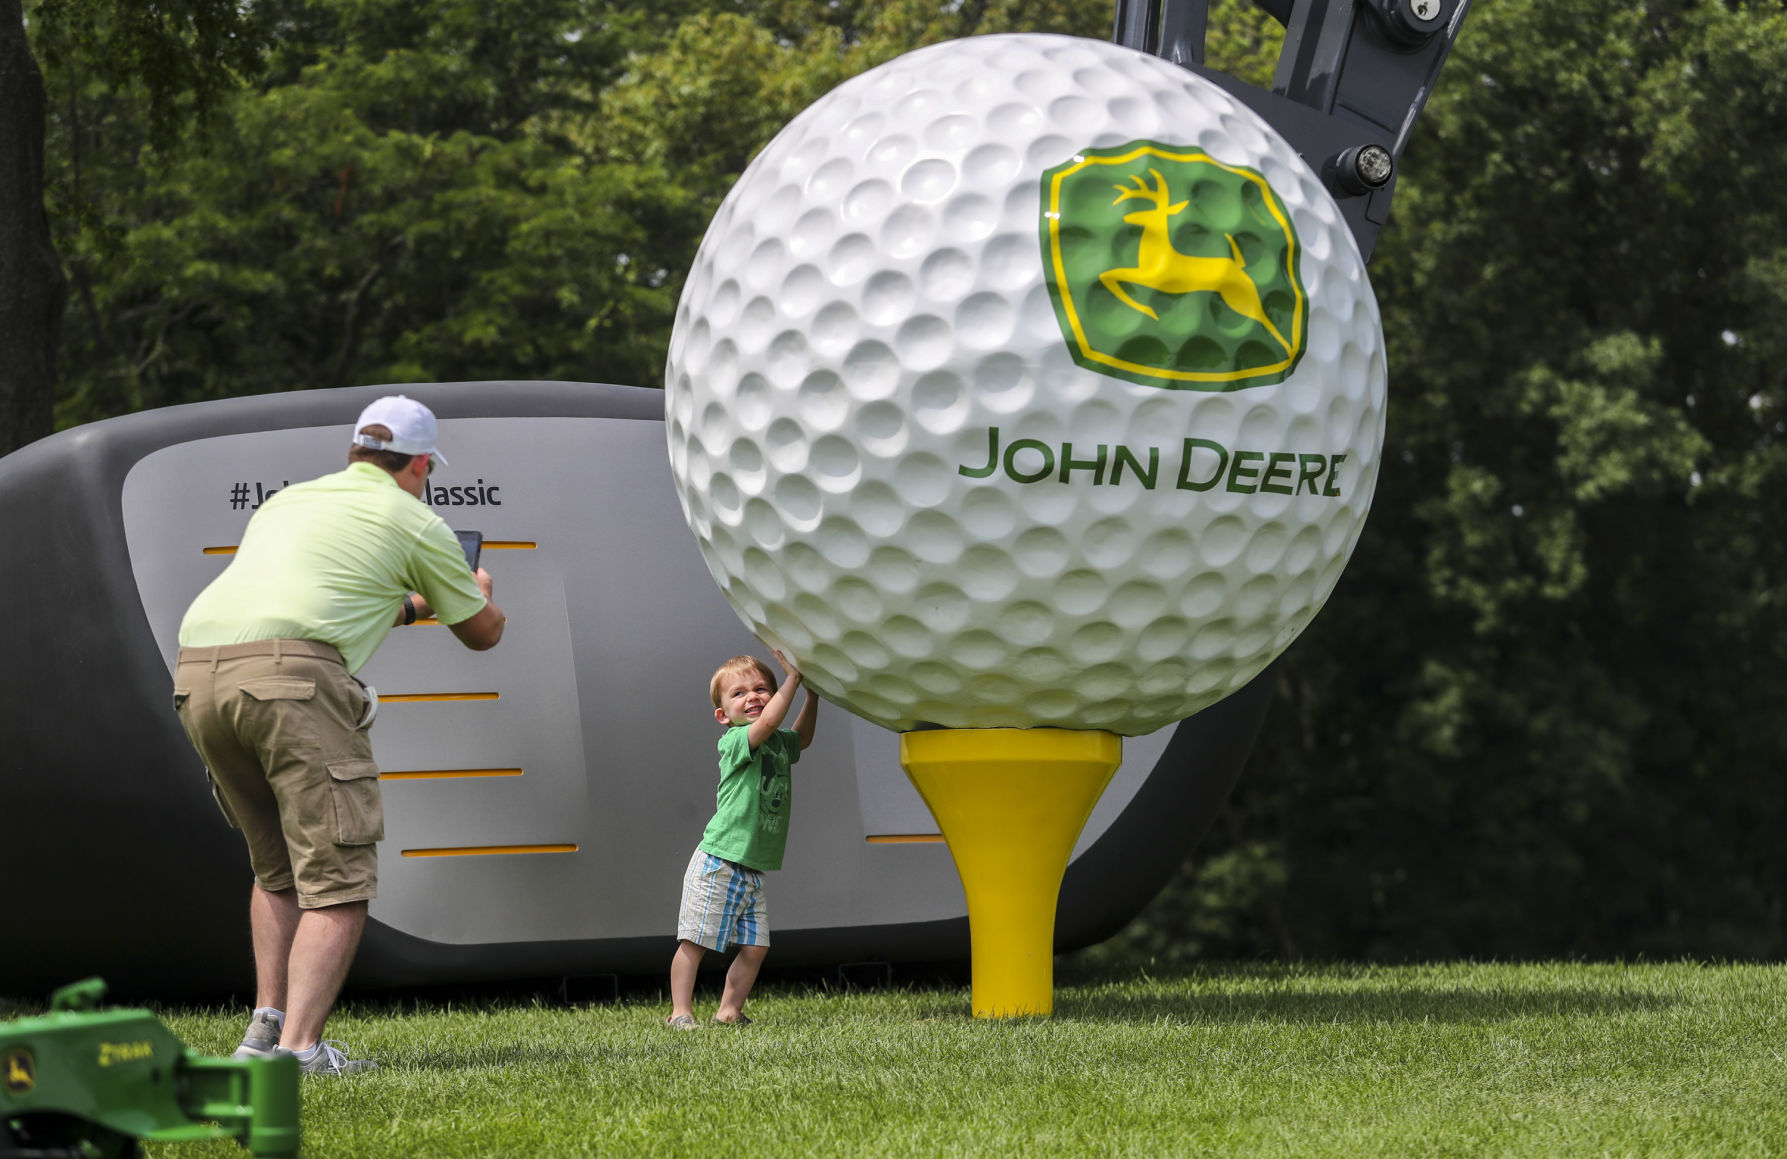 Family Zone at John Deere Classic is an air-conditioned oasis of fun